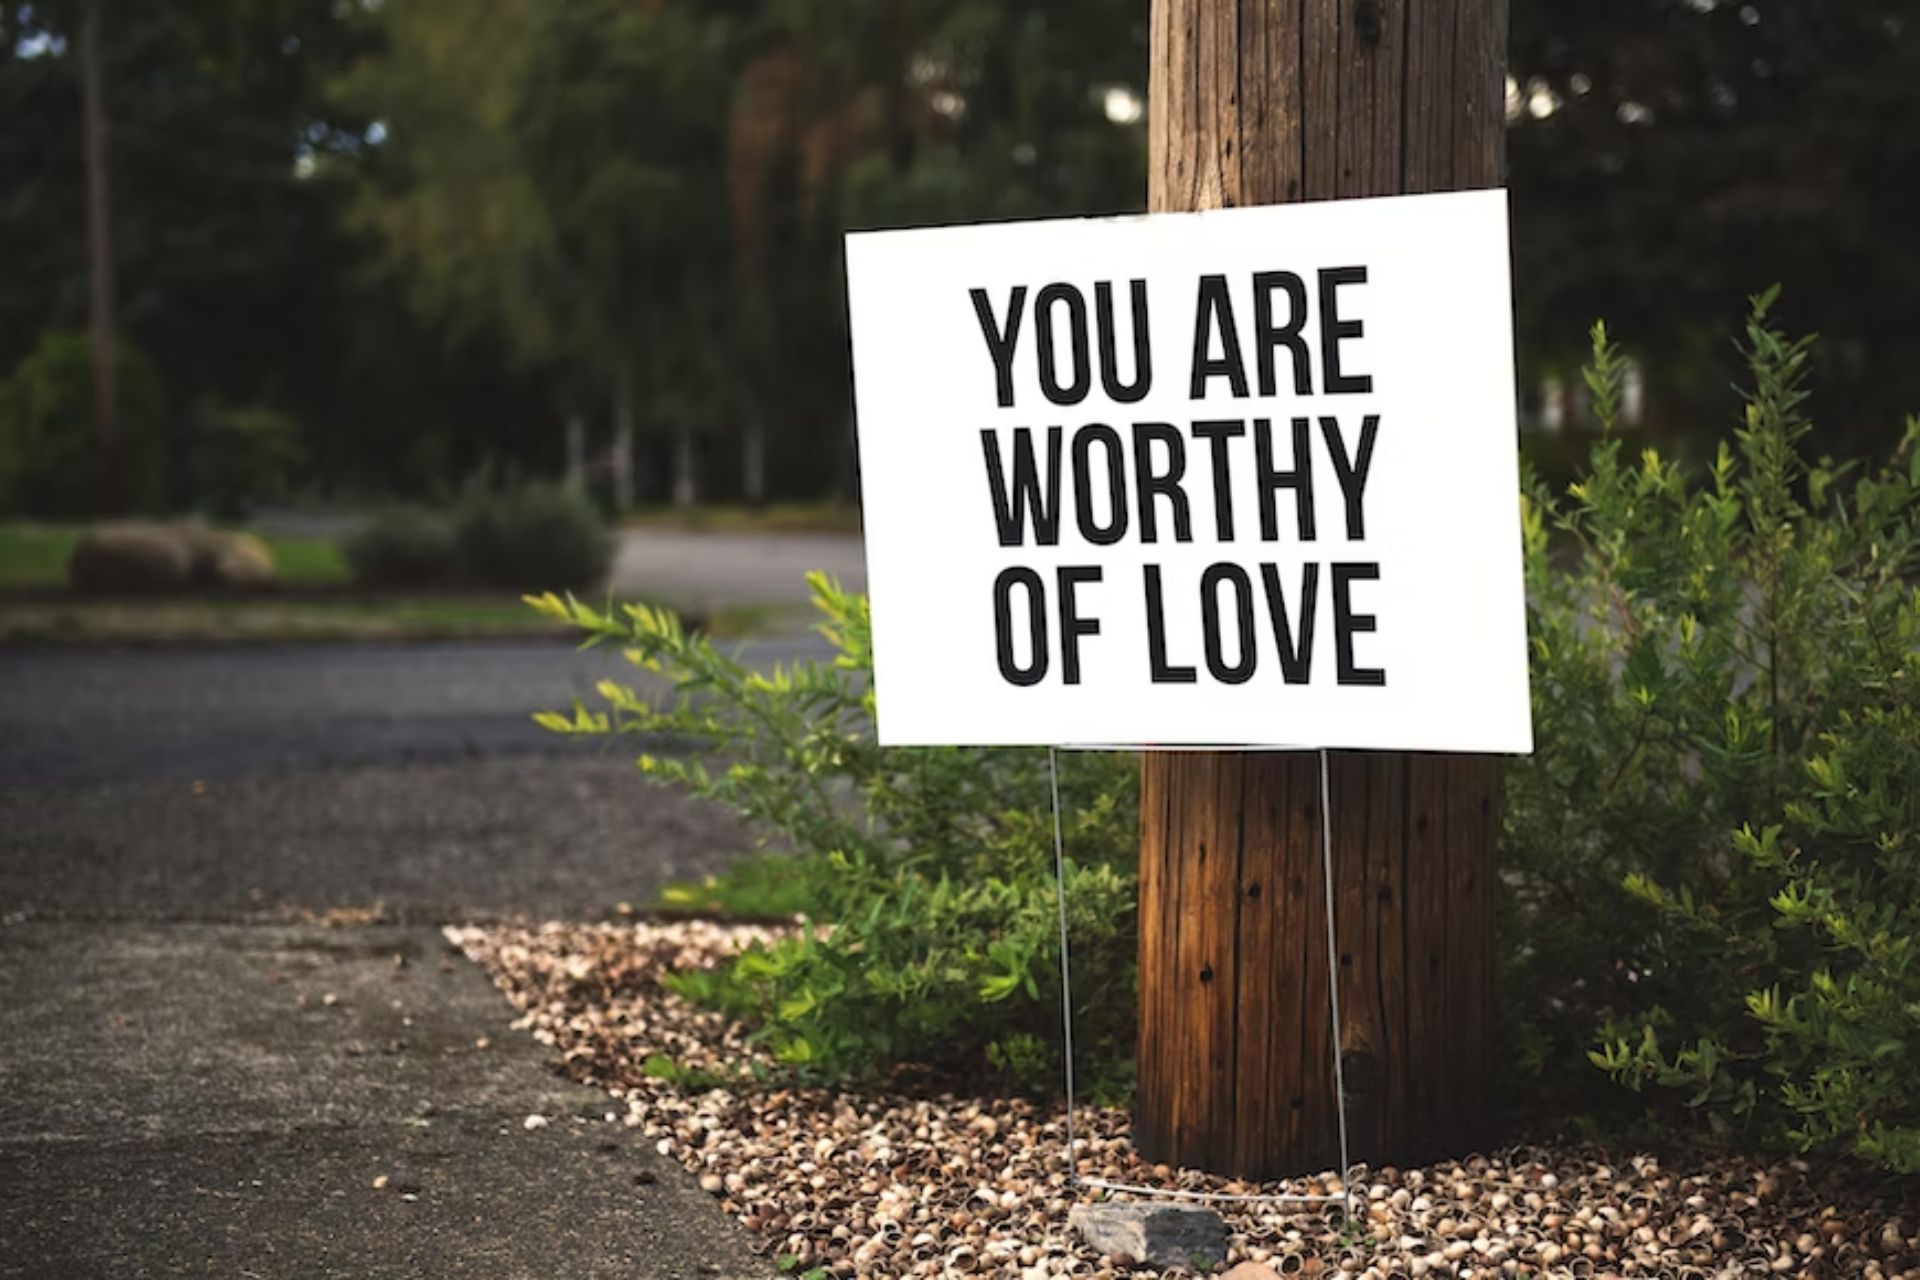 Image features a thick wooden pole on the side of the road. Directly in front of it is a white sign with black capital letters that reads: "You are worthy of love." This message can also help you in your journey of learning how to love your body.